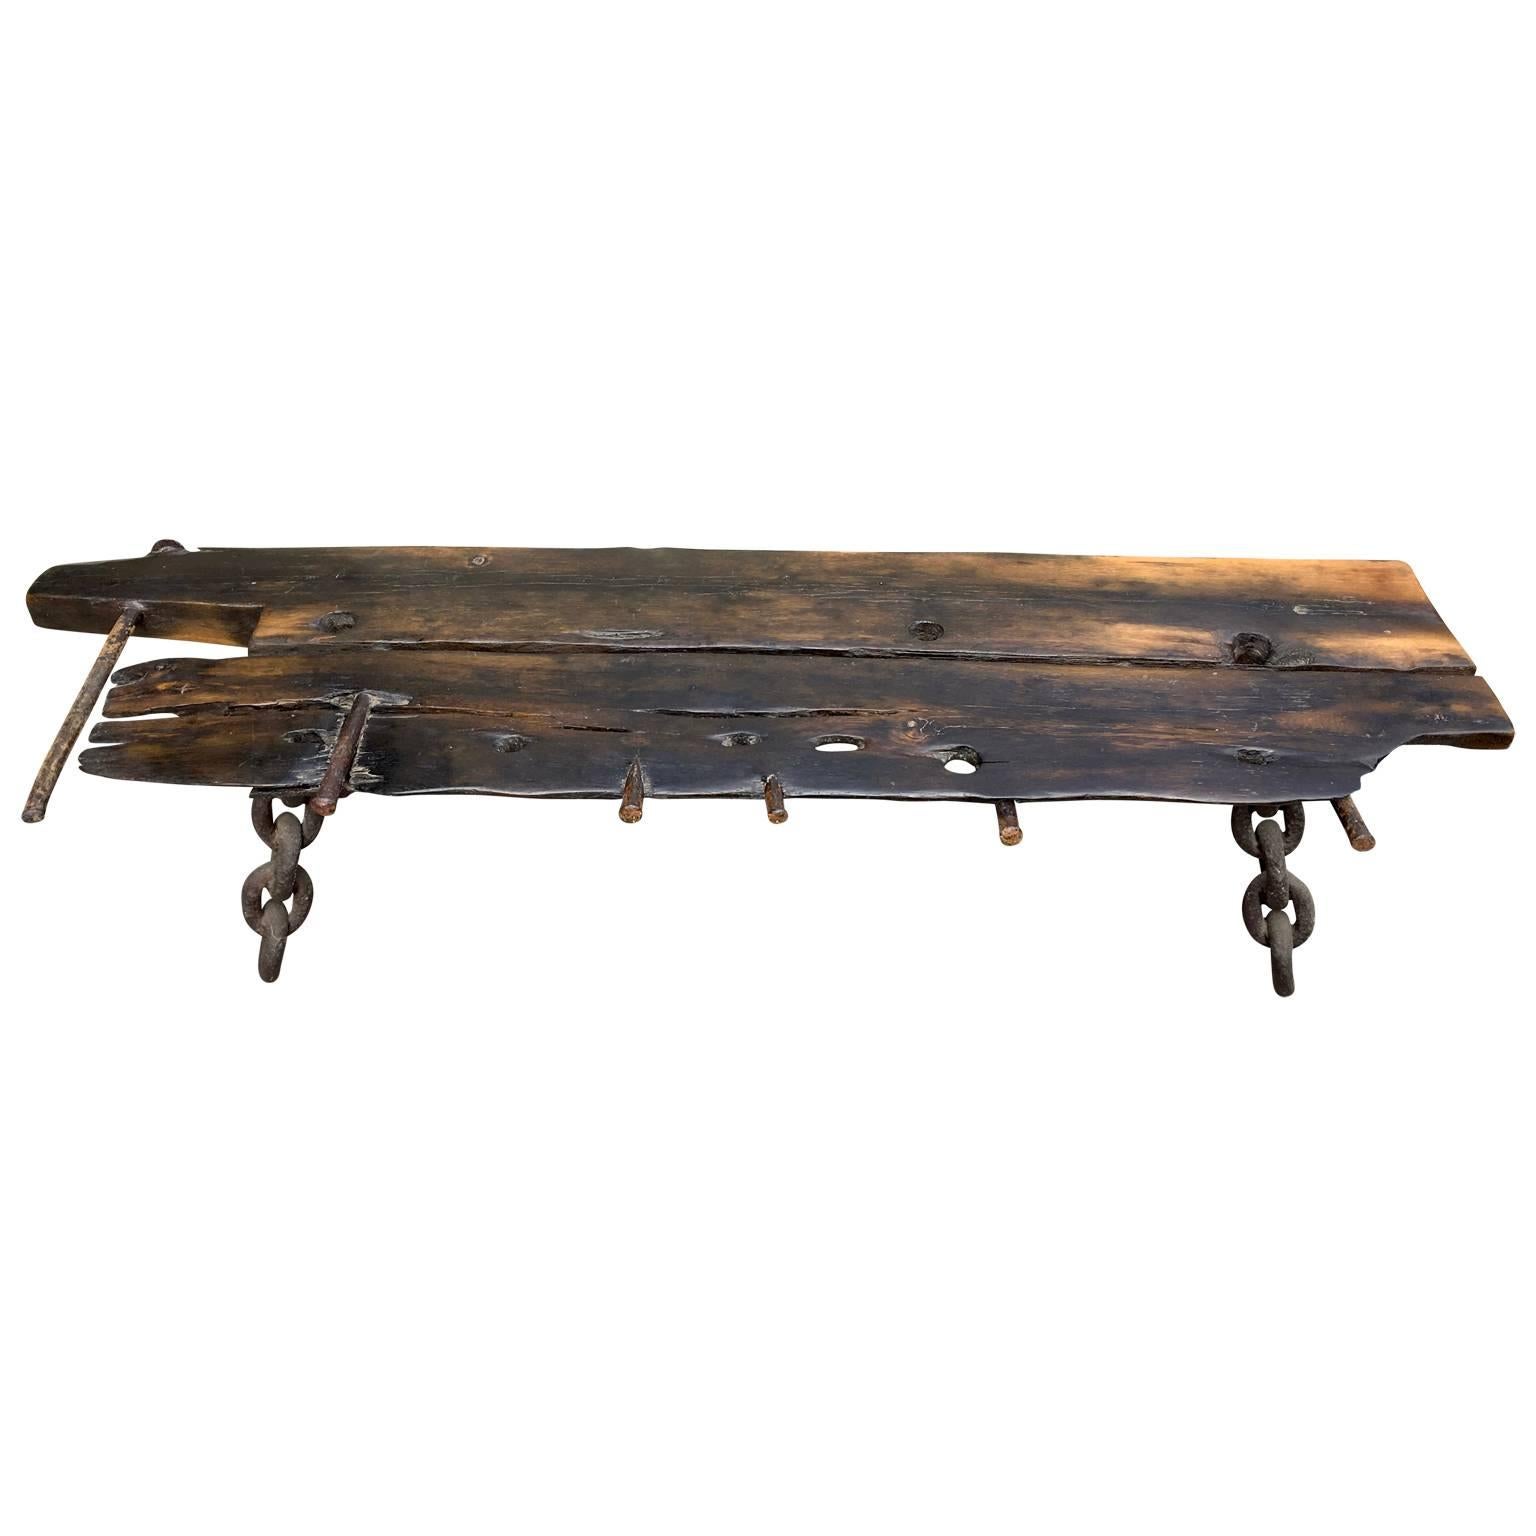 M. Stalker Long Studio Bench from Shipwreck Wood and Chain